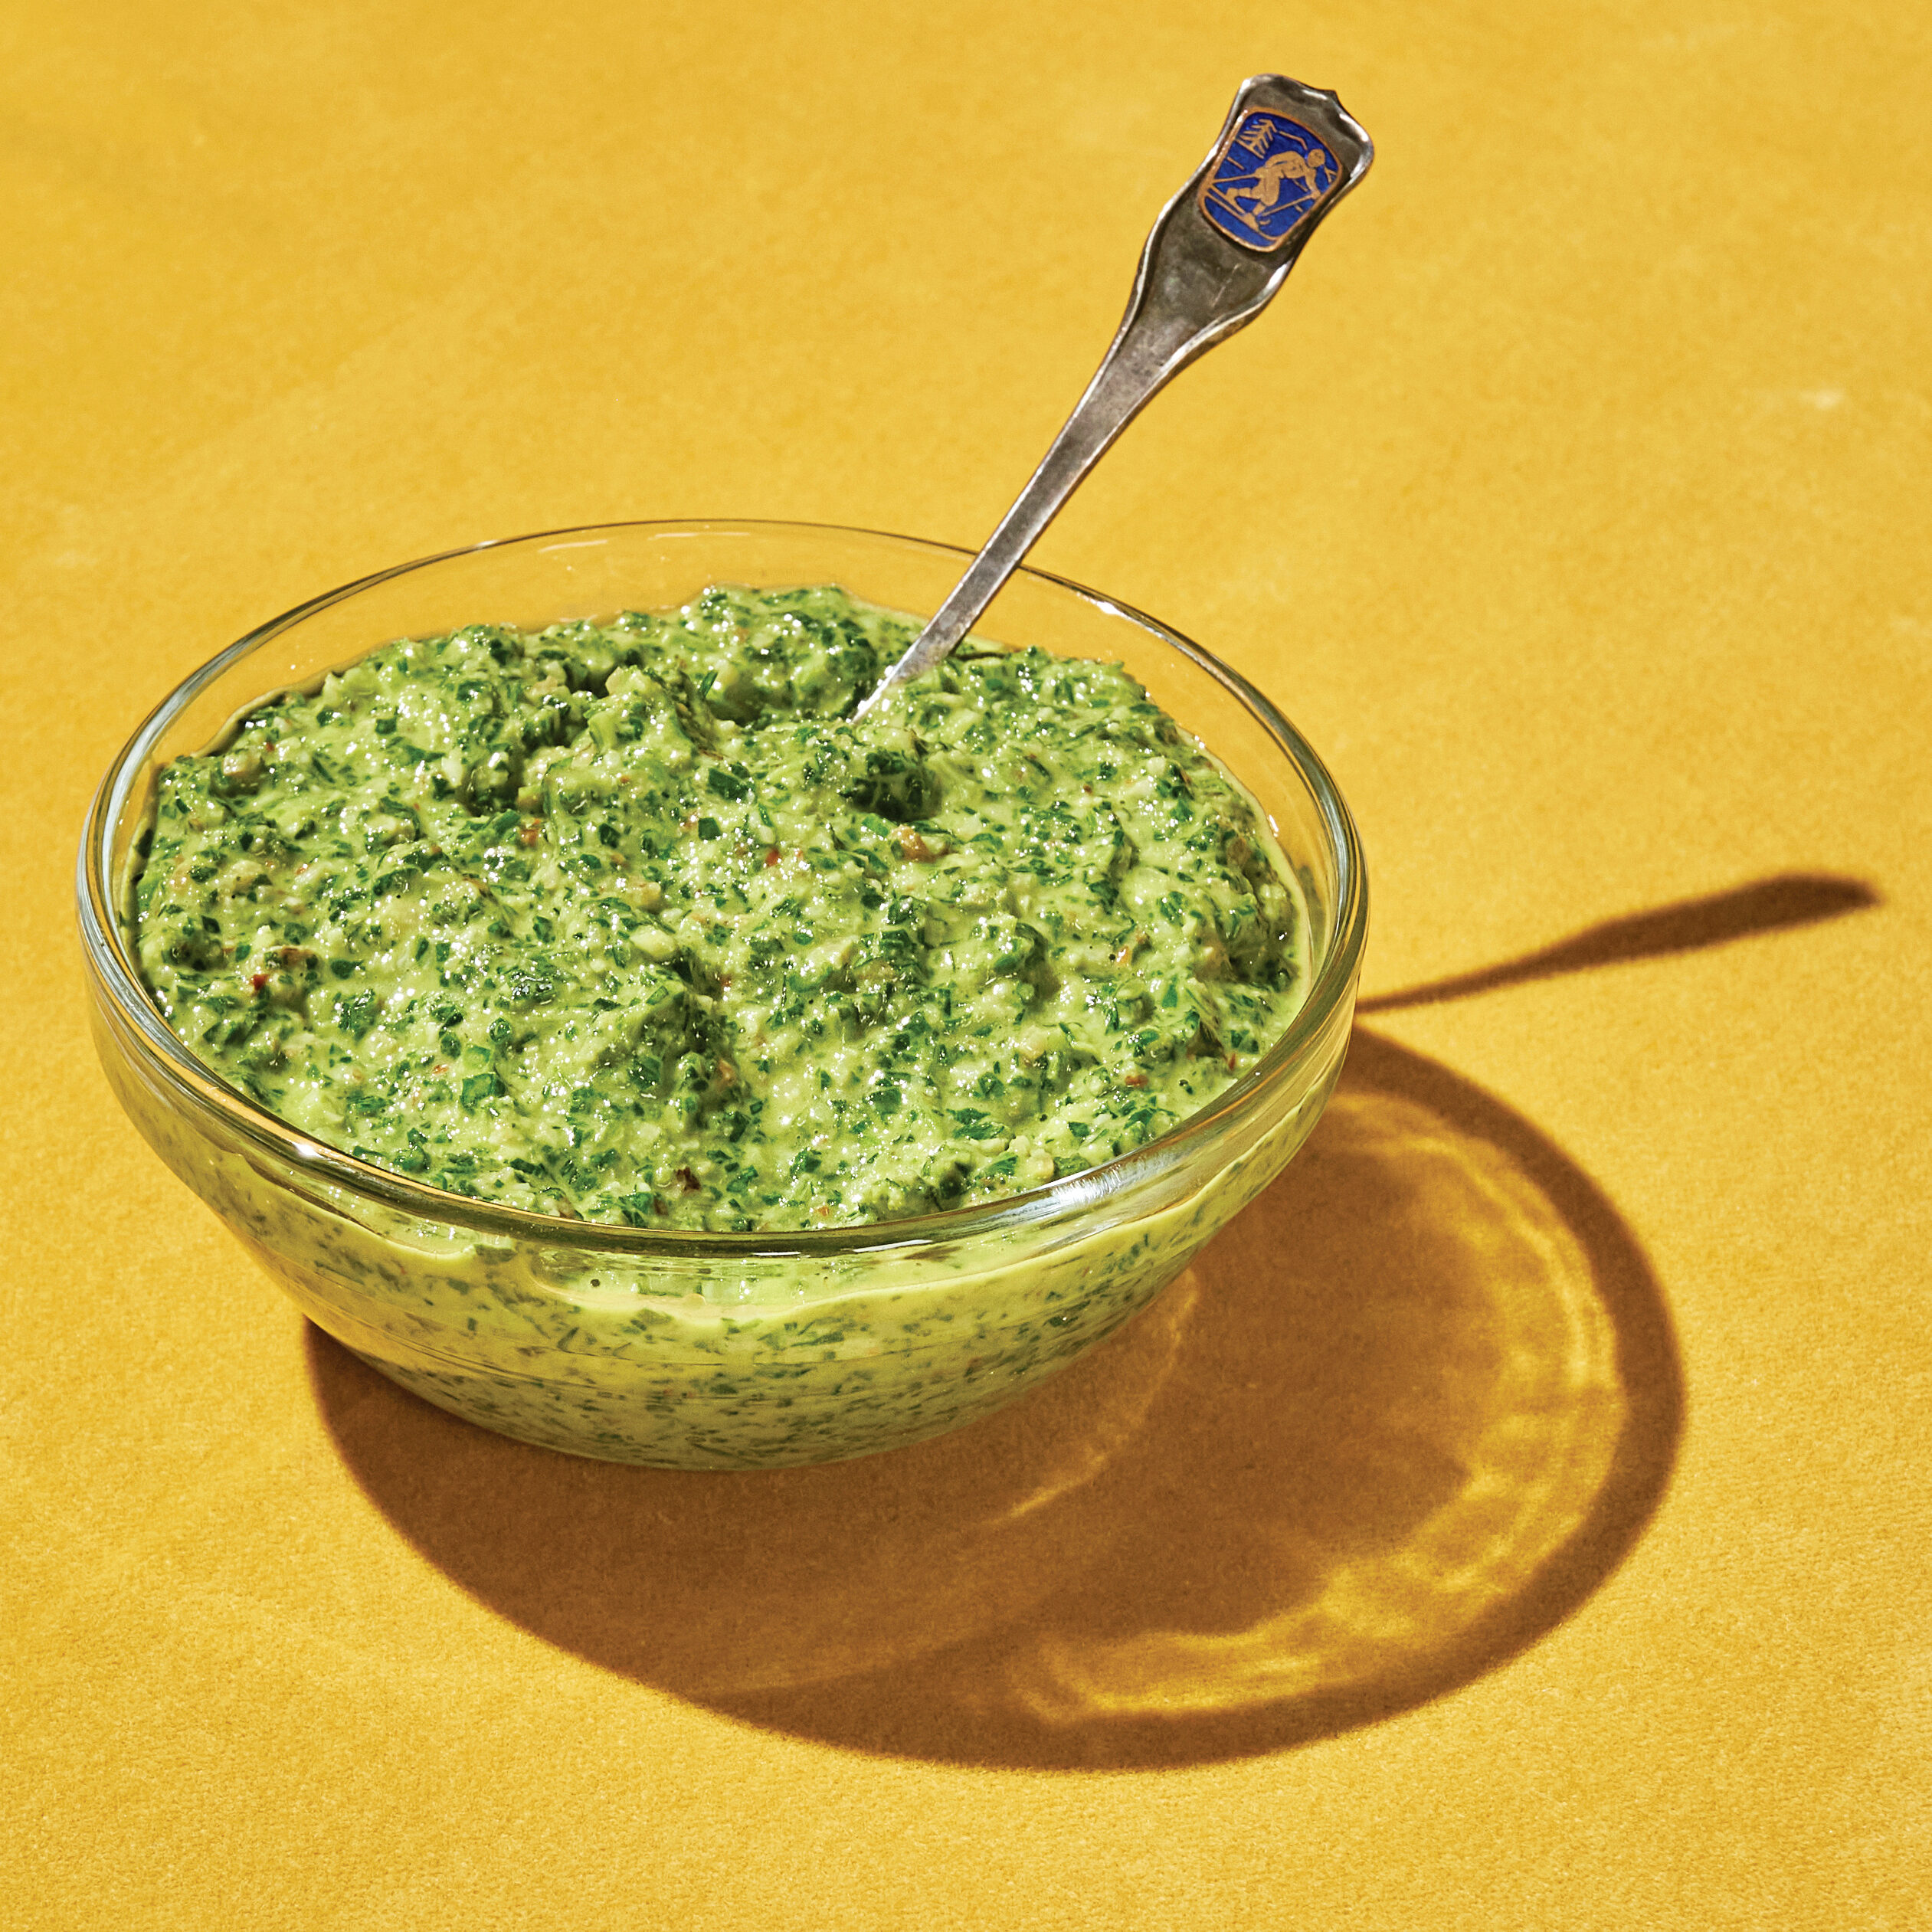 green pesto inside a clear bowl with a silver spoon against a yellow background